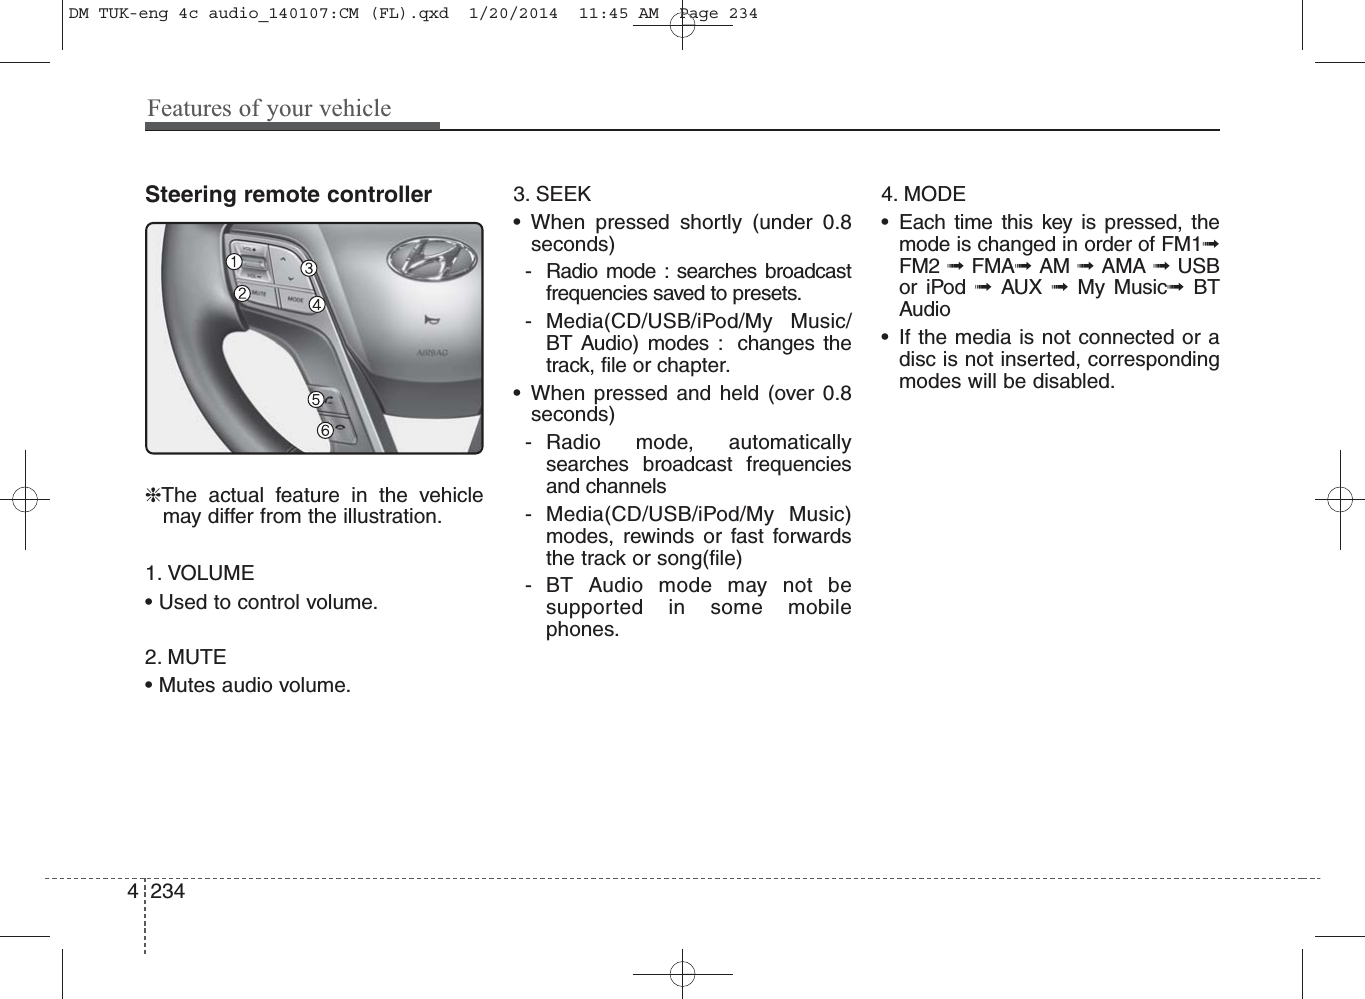 Features of your vehicle2344Steering remote controller❈The actual feature in the vehiclemay differ from the illustration.1. VOLUME• Used to control volume.2. MUTE• Mutes audio volume.3. SEEK• When pressed shortly (under 0.8seconds)- Radio mode : searches broadcastfrequencies saved to presets.- Media(CD/USB/iPod/My Music/BT Audio) modes :  changes thetrack, file or chapter.• When pressed and held (over 0.8seconds)- Radio mode, automaticallysearches broadcast frequenciesand channels- Media(CD/USB/iPod/My Music)modes, rewinds or fast forwardsthe track or song(file)- BT Audio mode may not be supported in some mobilephones.4. MODE• Each time this key is pressed, themode is changed in order of FM1➟FM2 ➟ FMA➟AM ➟ AMA ➟ USBor iPod ➟  AUX  ➟  My Music➟  BTAudio• If the media is not connected or adisc is not inserted, correspondingmodes will be disabled.DM TUK-eng 4c audio_140107:CM (FL).qxd  1/20/2014  11:45 AM  Page 234